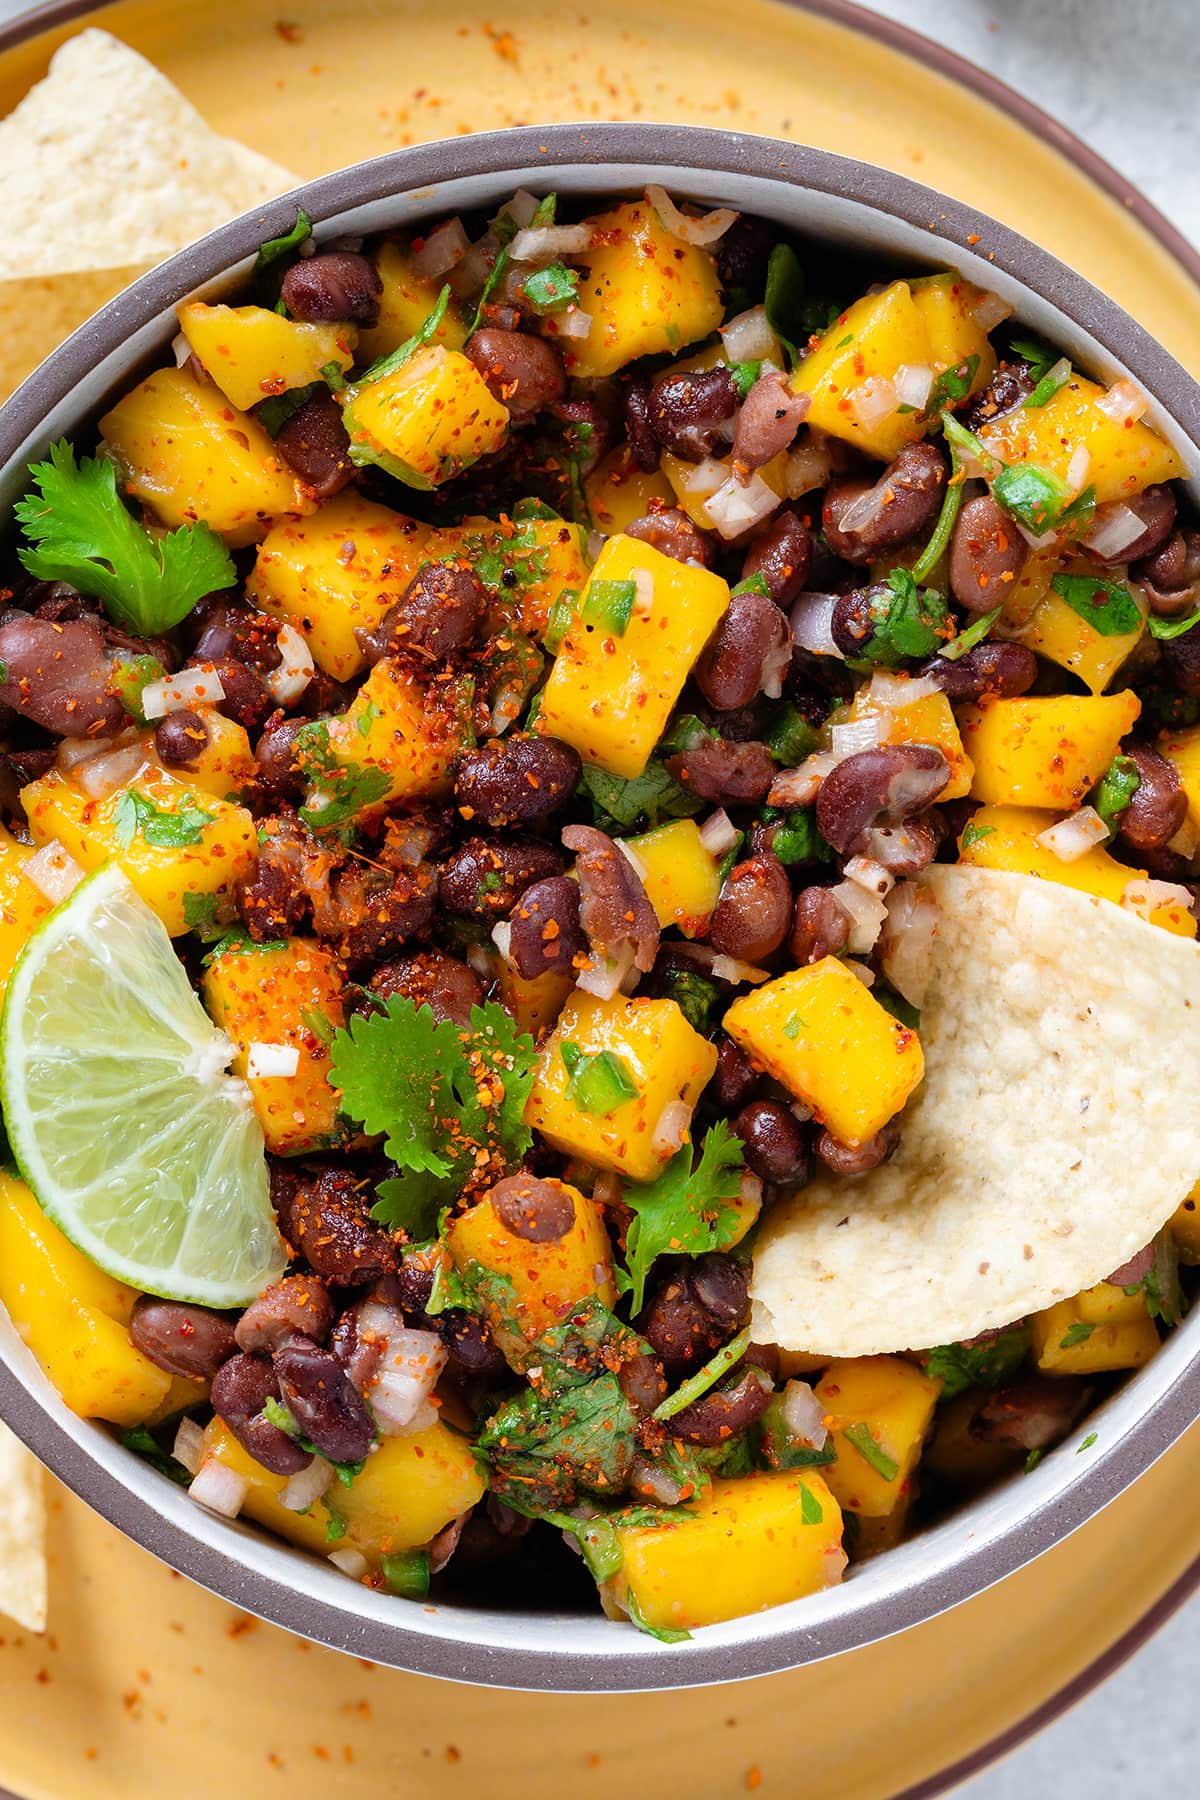 Black beans and mango salsa with fresh parsley in a ceramic bowl on a yellow plate garnished with a slice of lime.